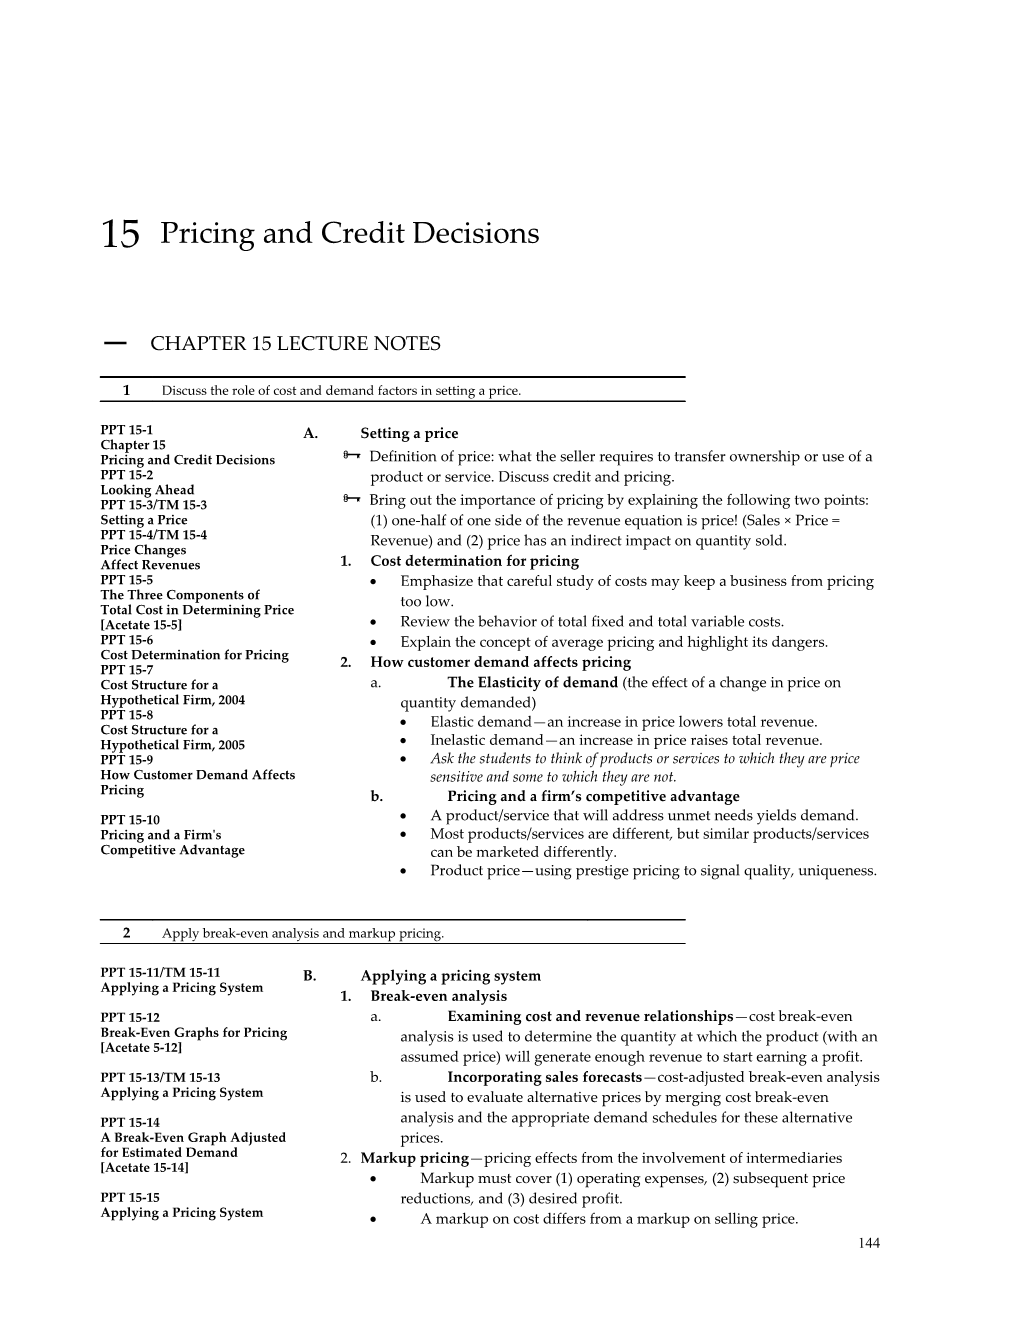 Chapter 15 Pricing and Credit Decisions1